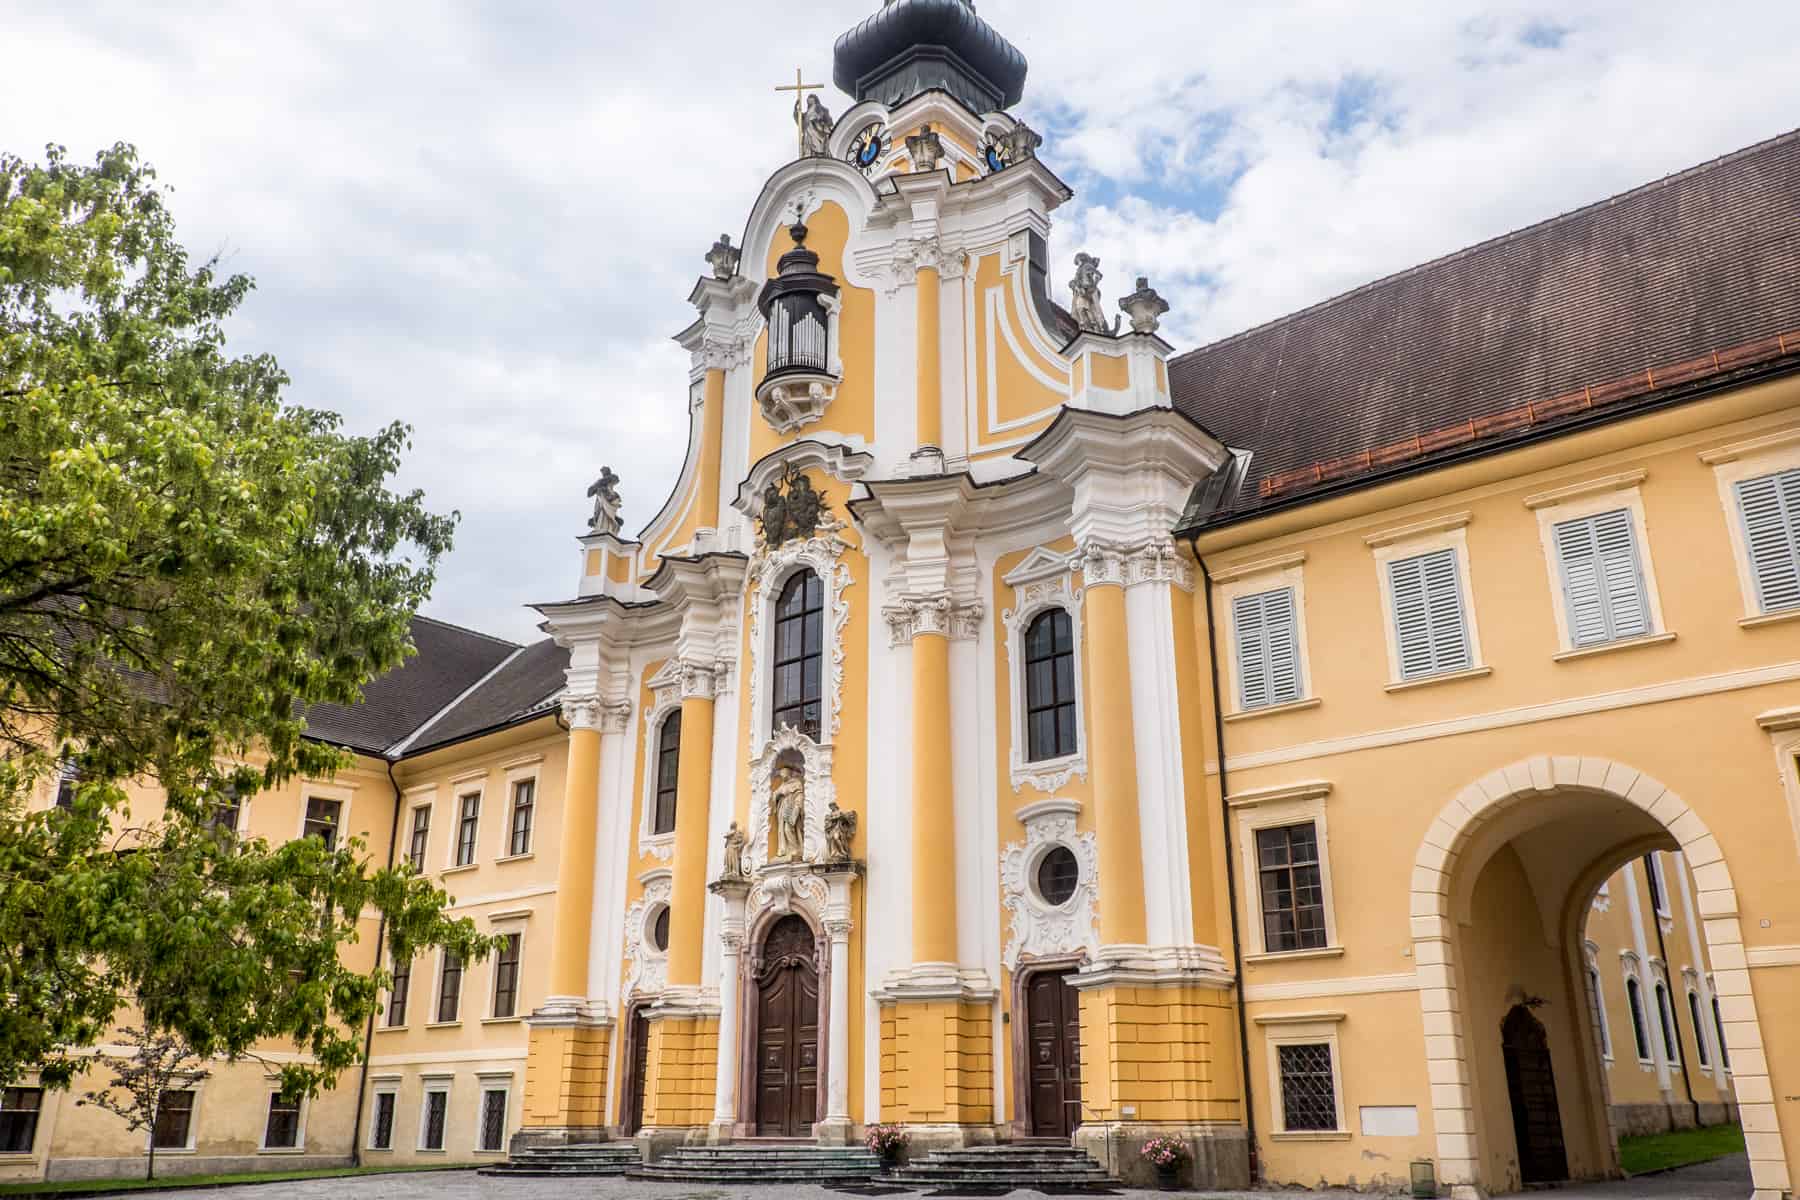 The buttery yellow and white columned exterior of the basilica at Rein Abbey - the Oldest Cistercian Monastery in the World Austria